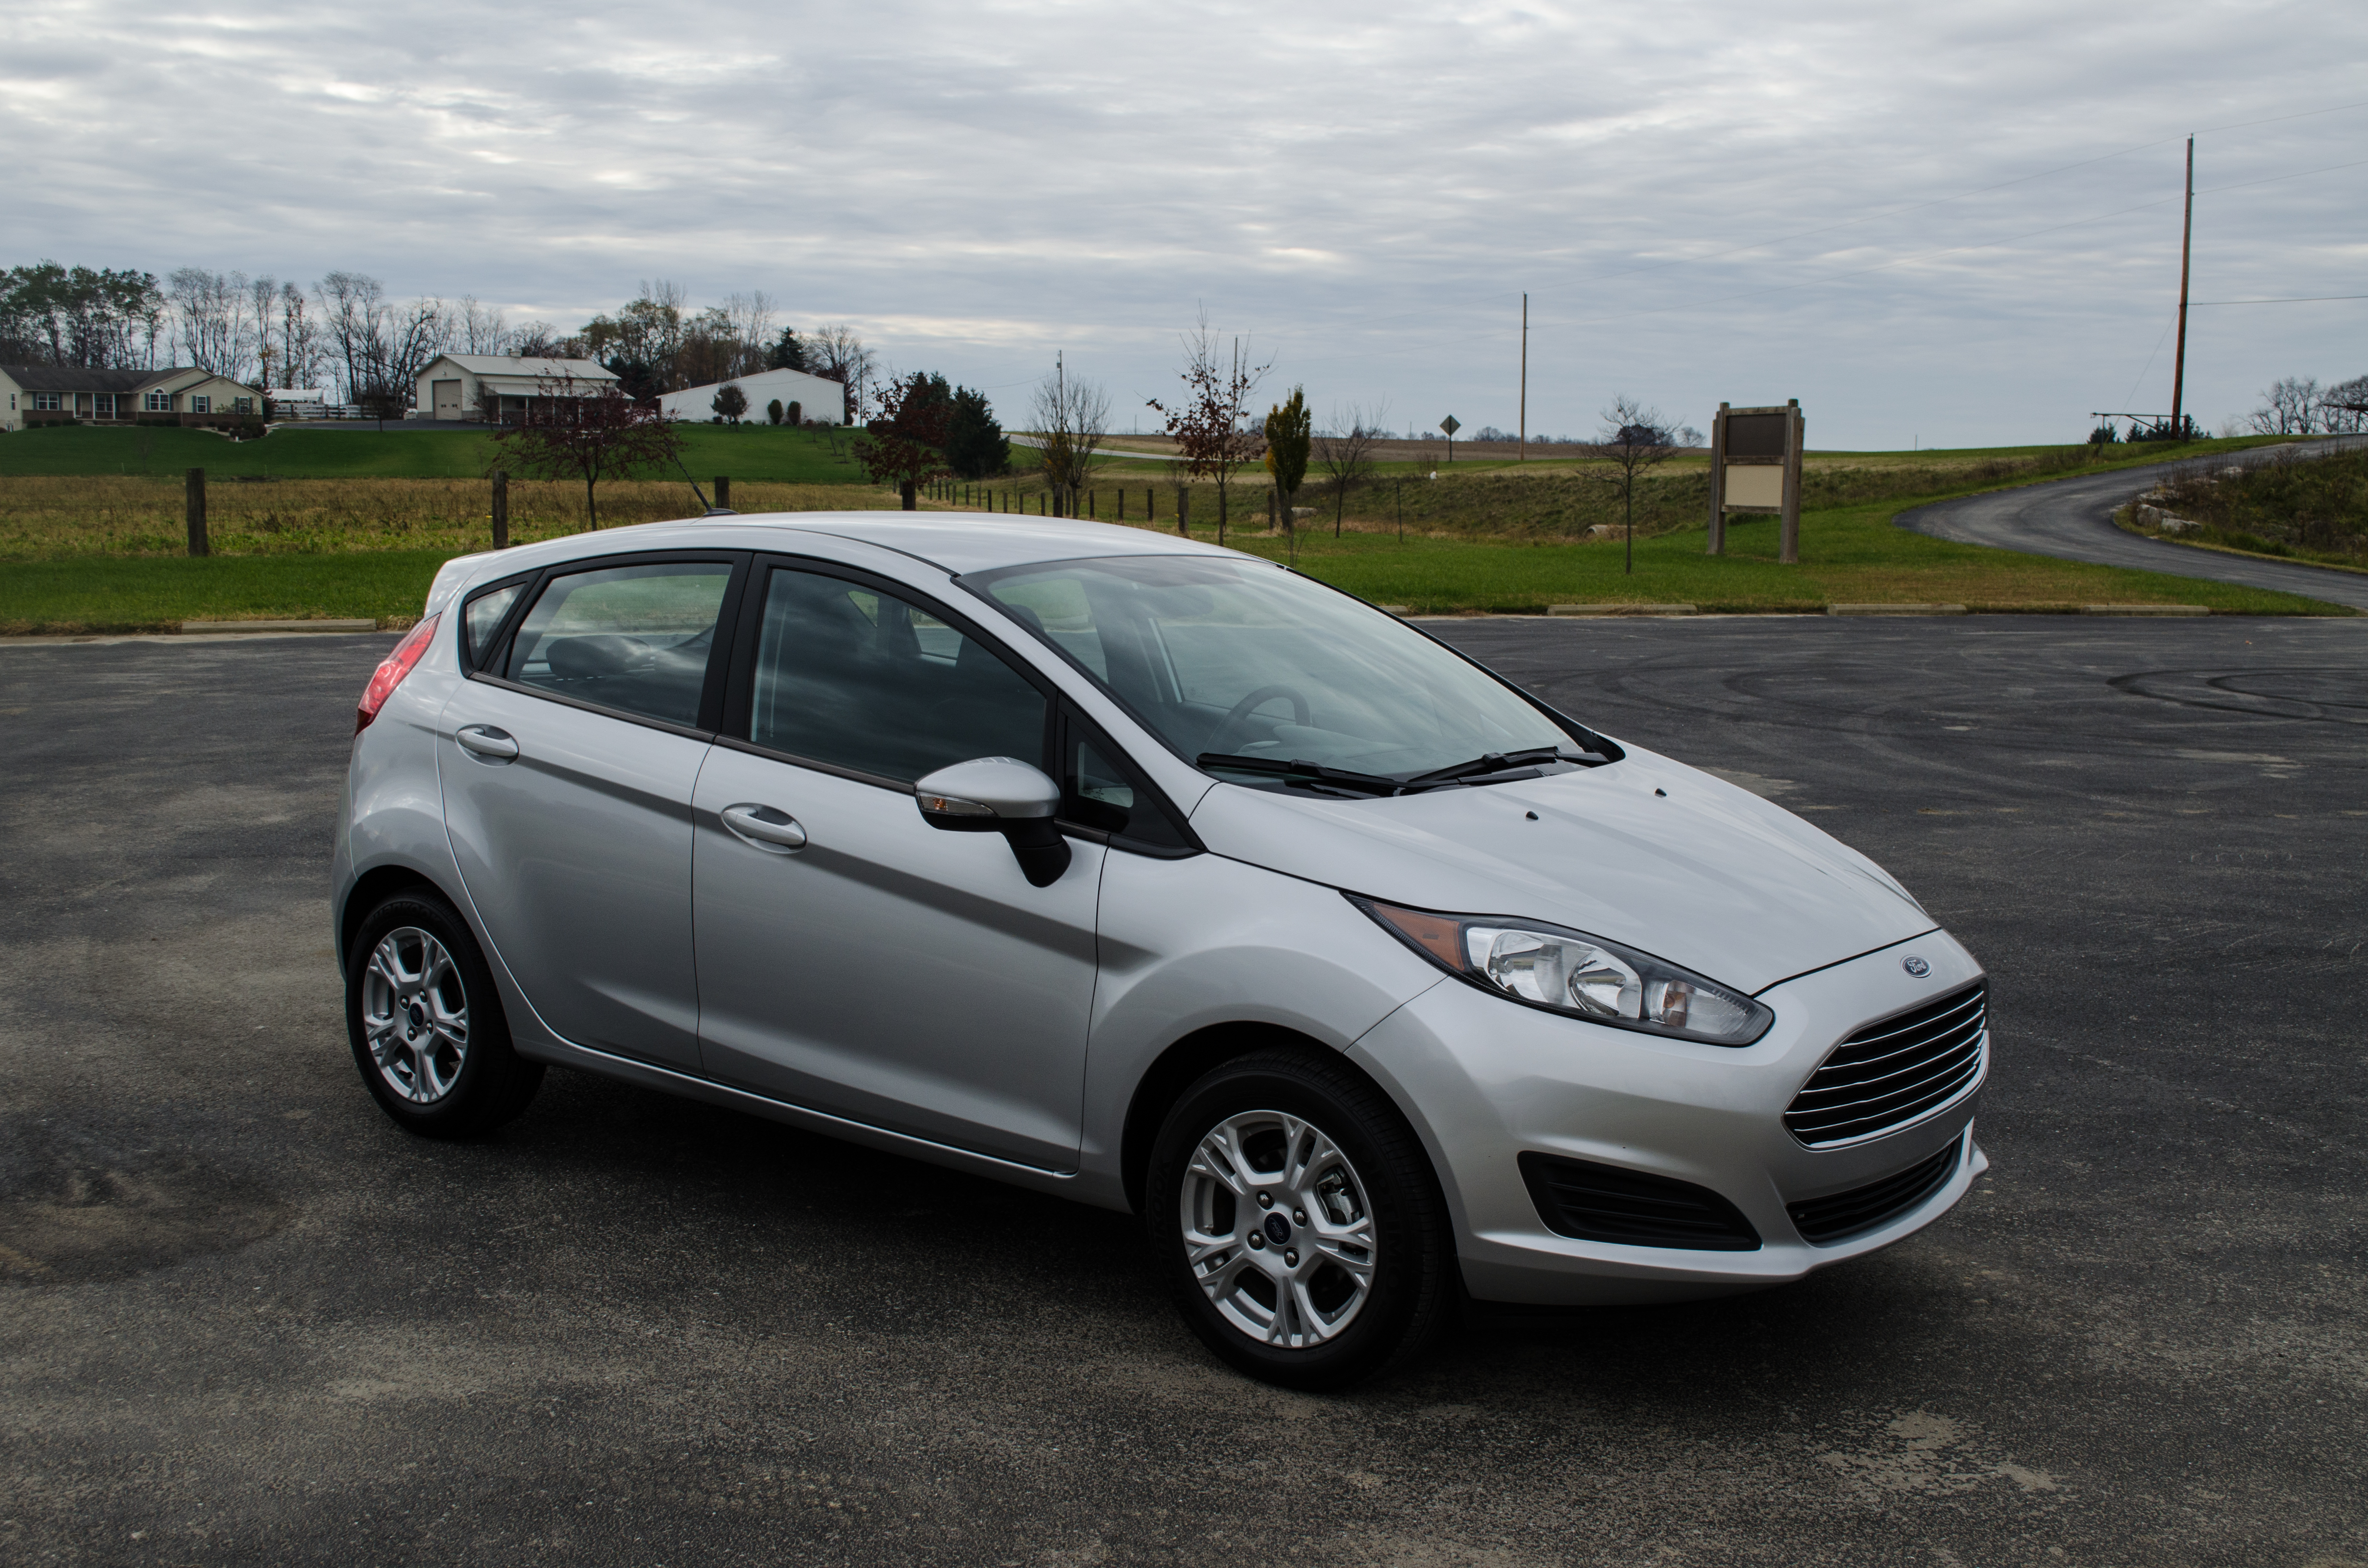 2014 Ford Fiesta SE Review - Motor Review